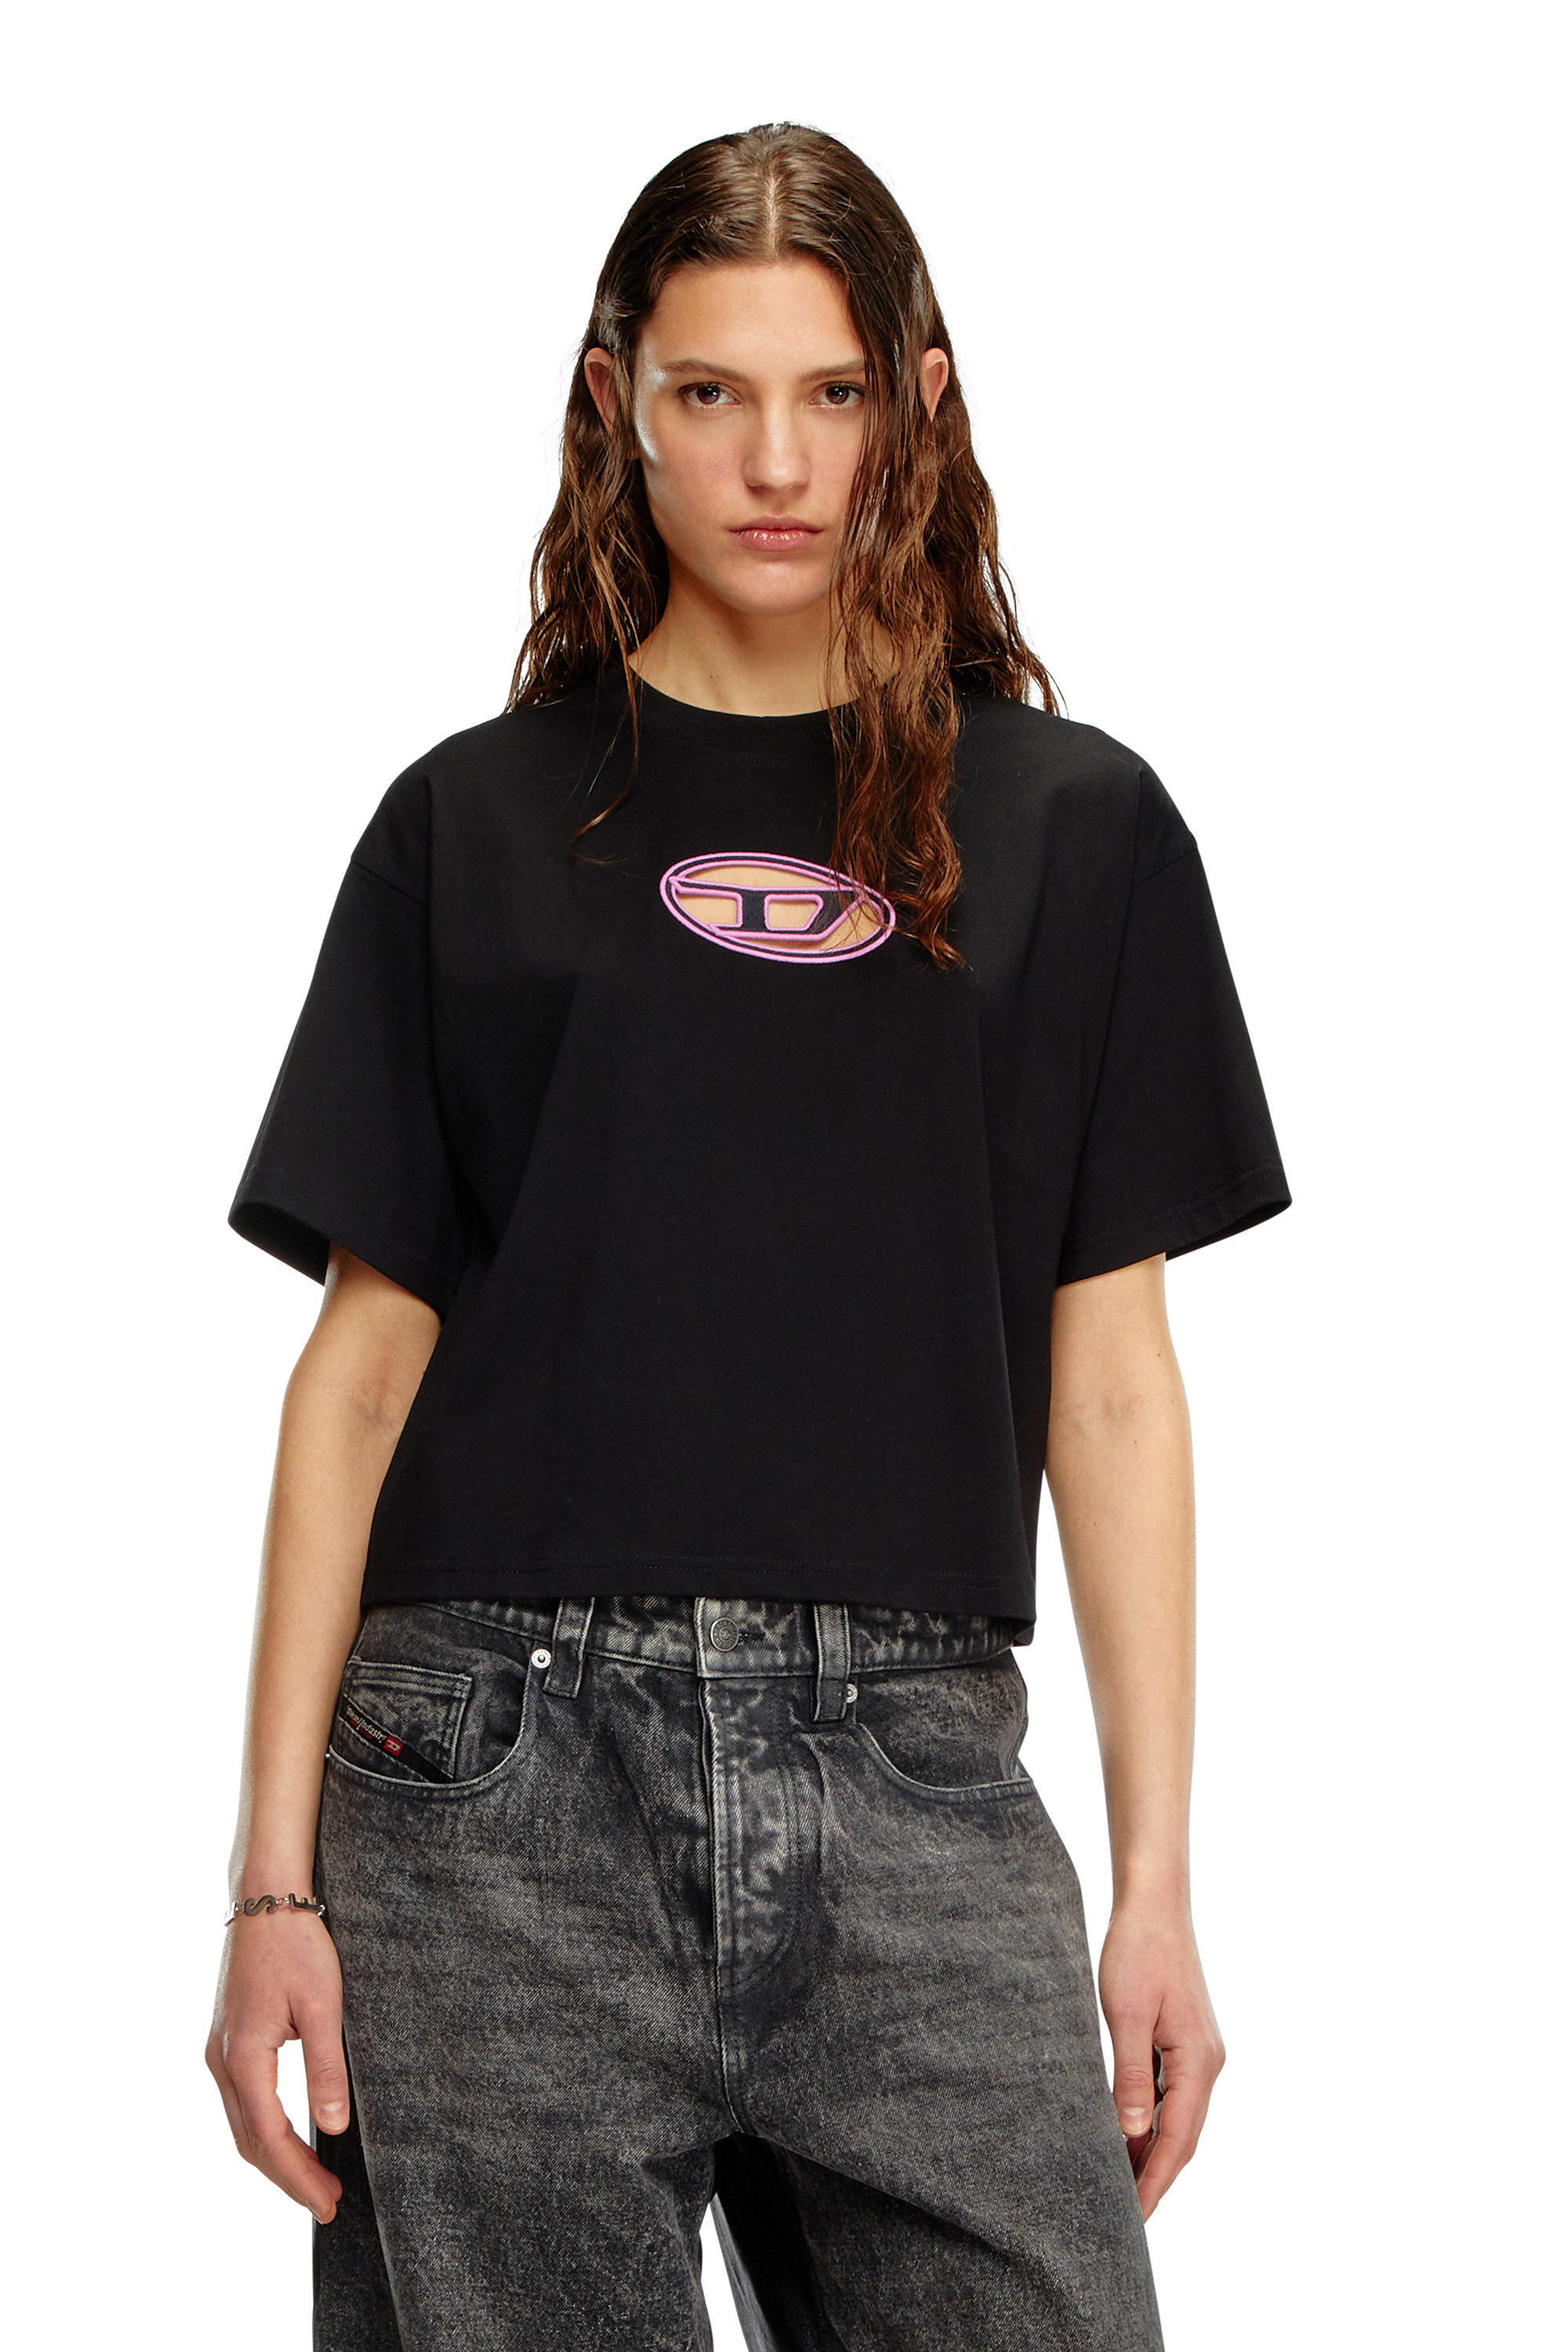 T-BUXT-CROP-OD Boxy T-shirt with cut-out Oval D logo｜マルチカラー 